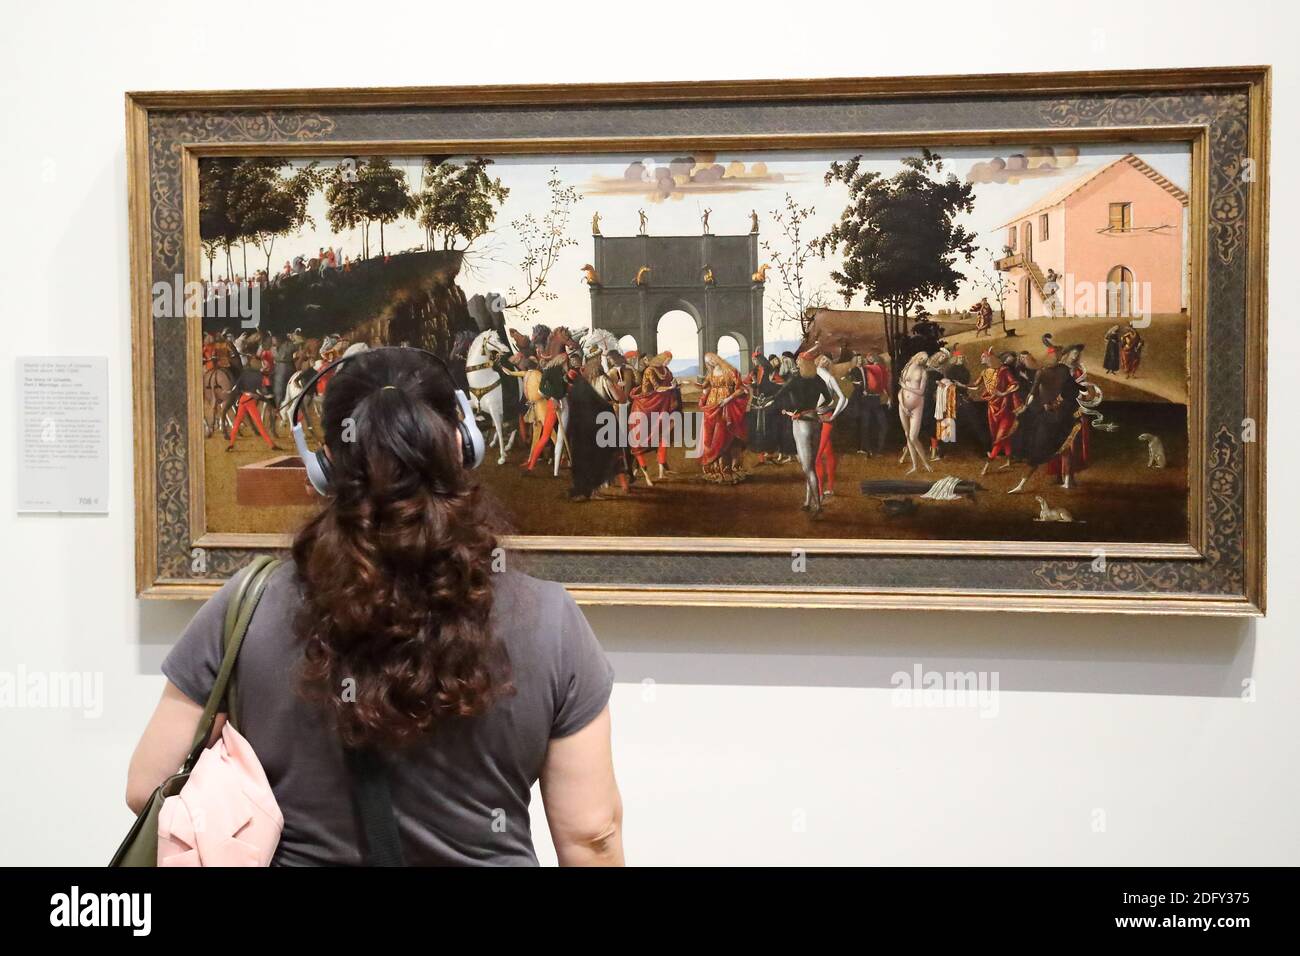 A young woman studying a painting 'The Story of Griselda' at the National Gallery, London, UK Stock Photo